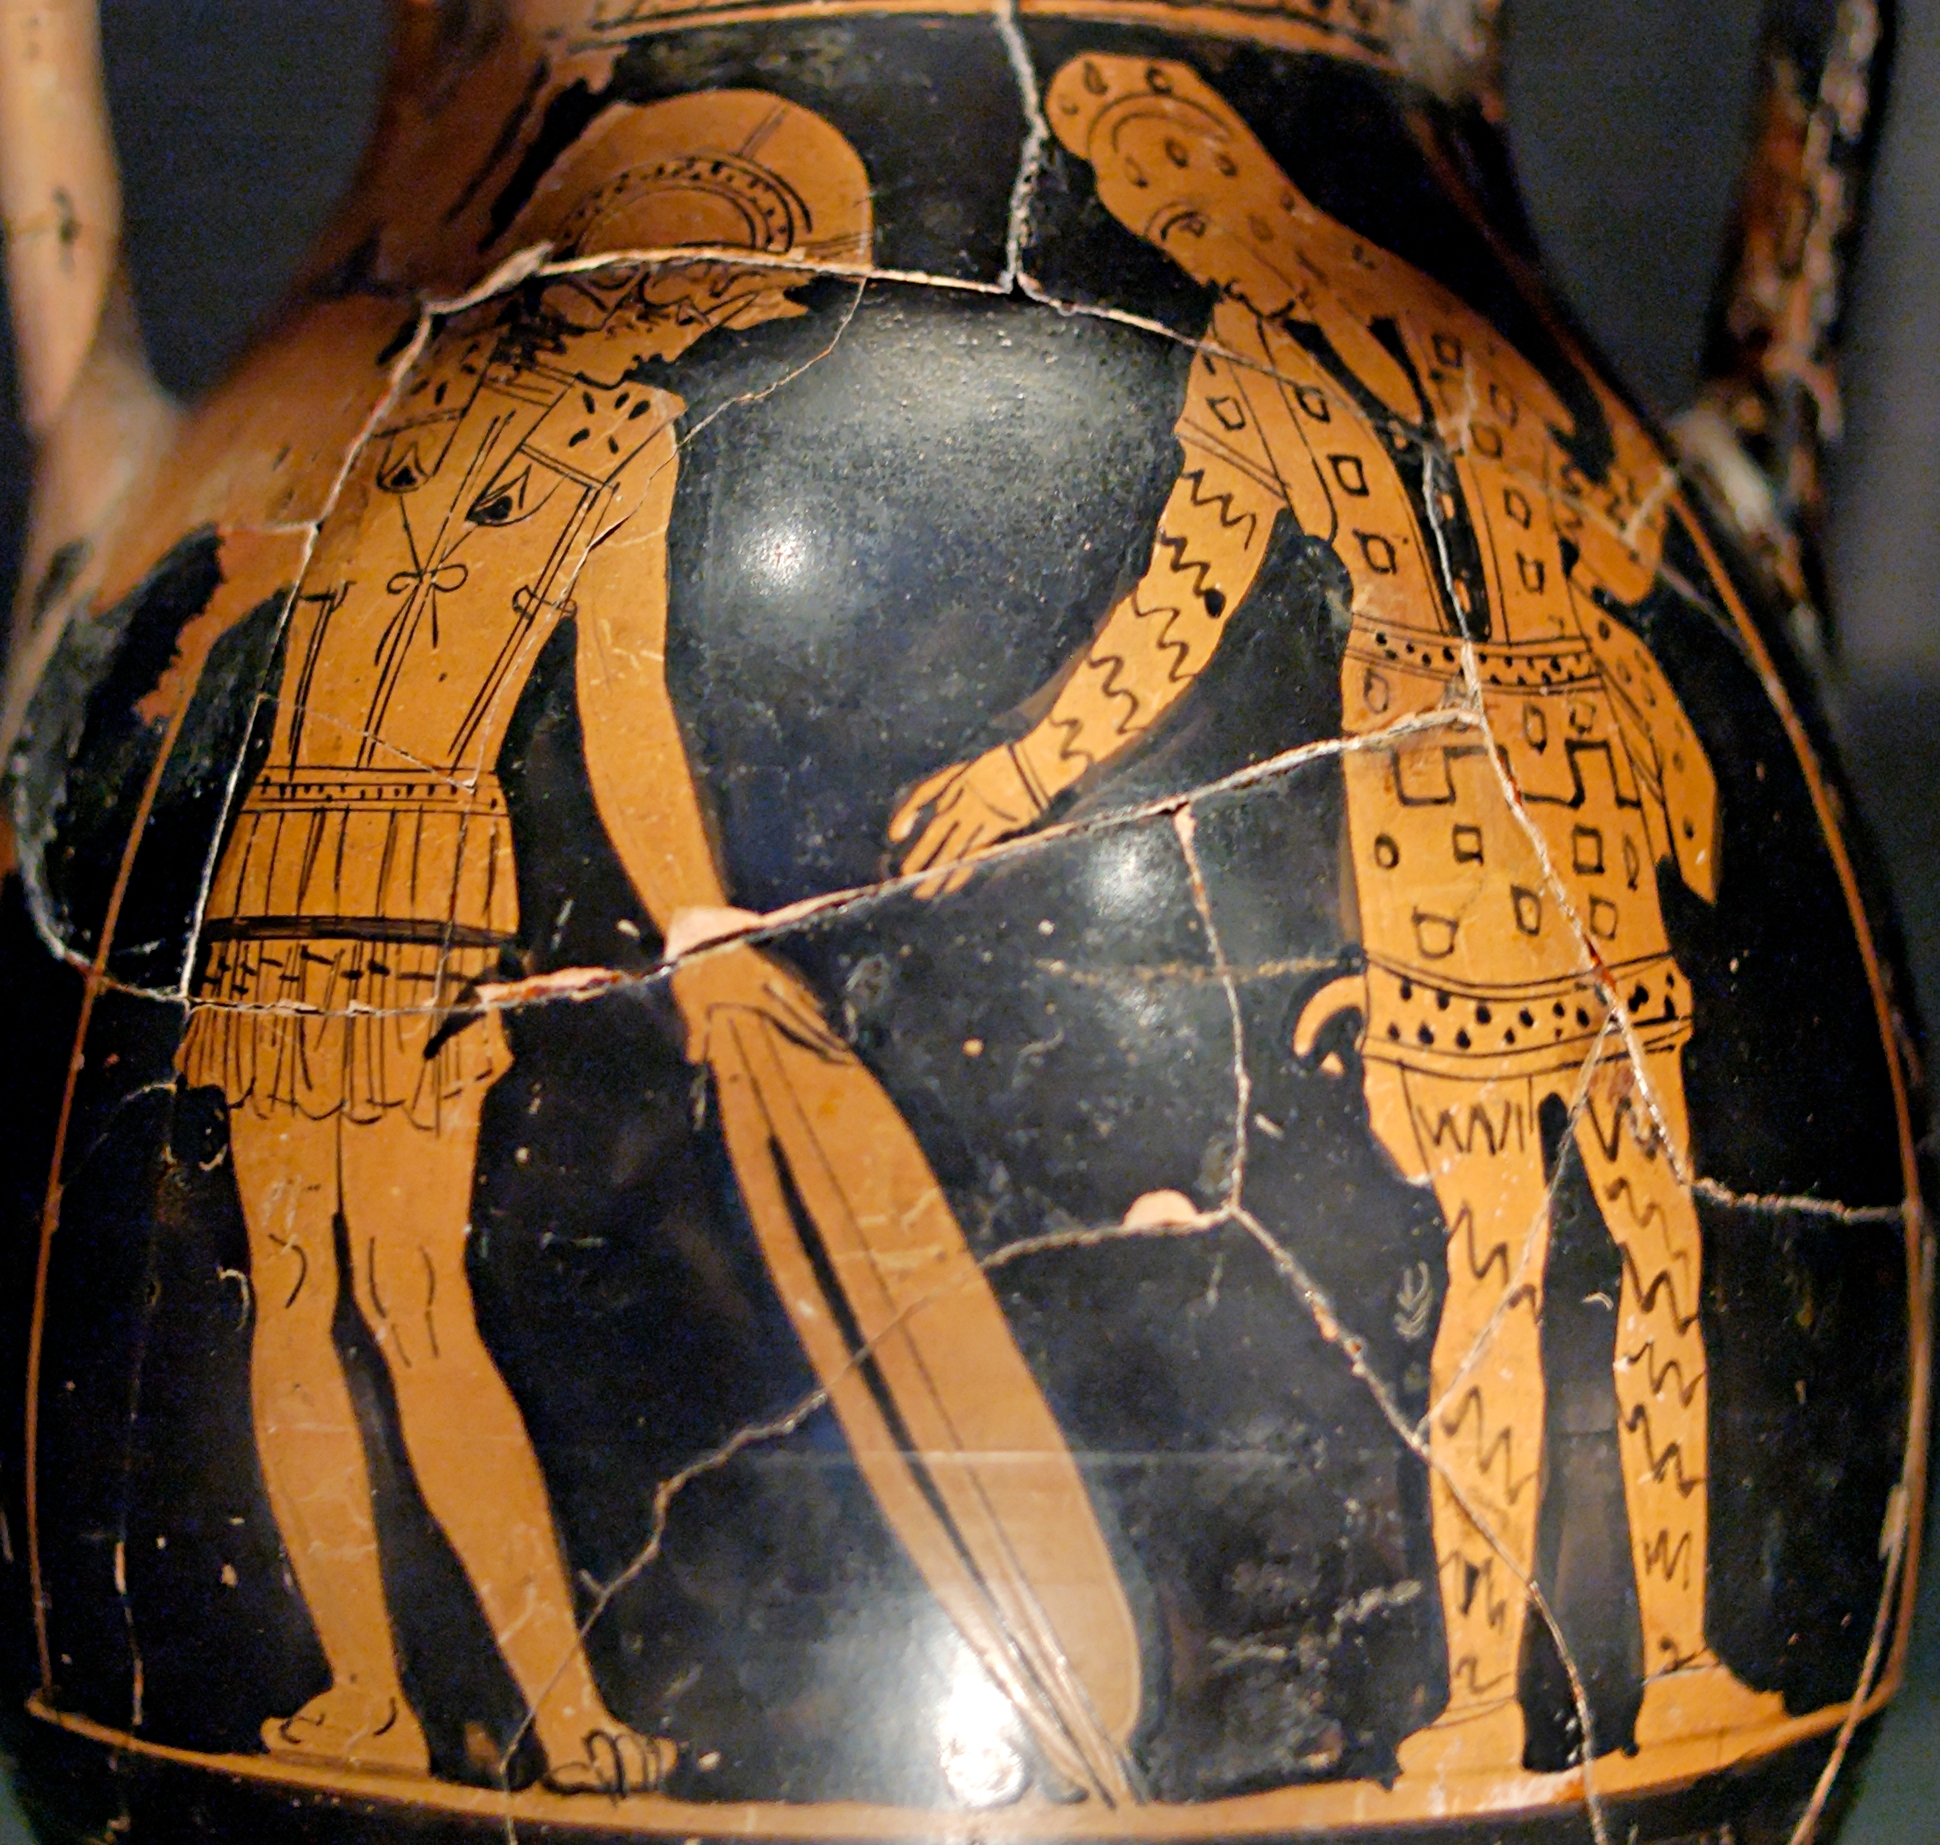 Diomedes passes a shield to Glaucus. Diomedes wears tunic-like Greek armour and a helm, while Glaucus wears a patterned tunic, headdress, and leggings. Both carry spears.